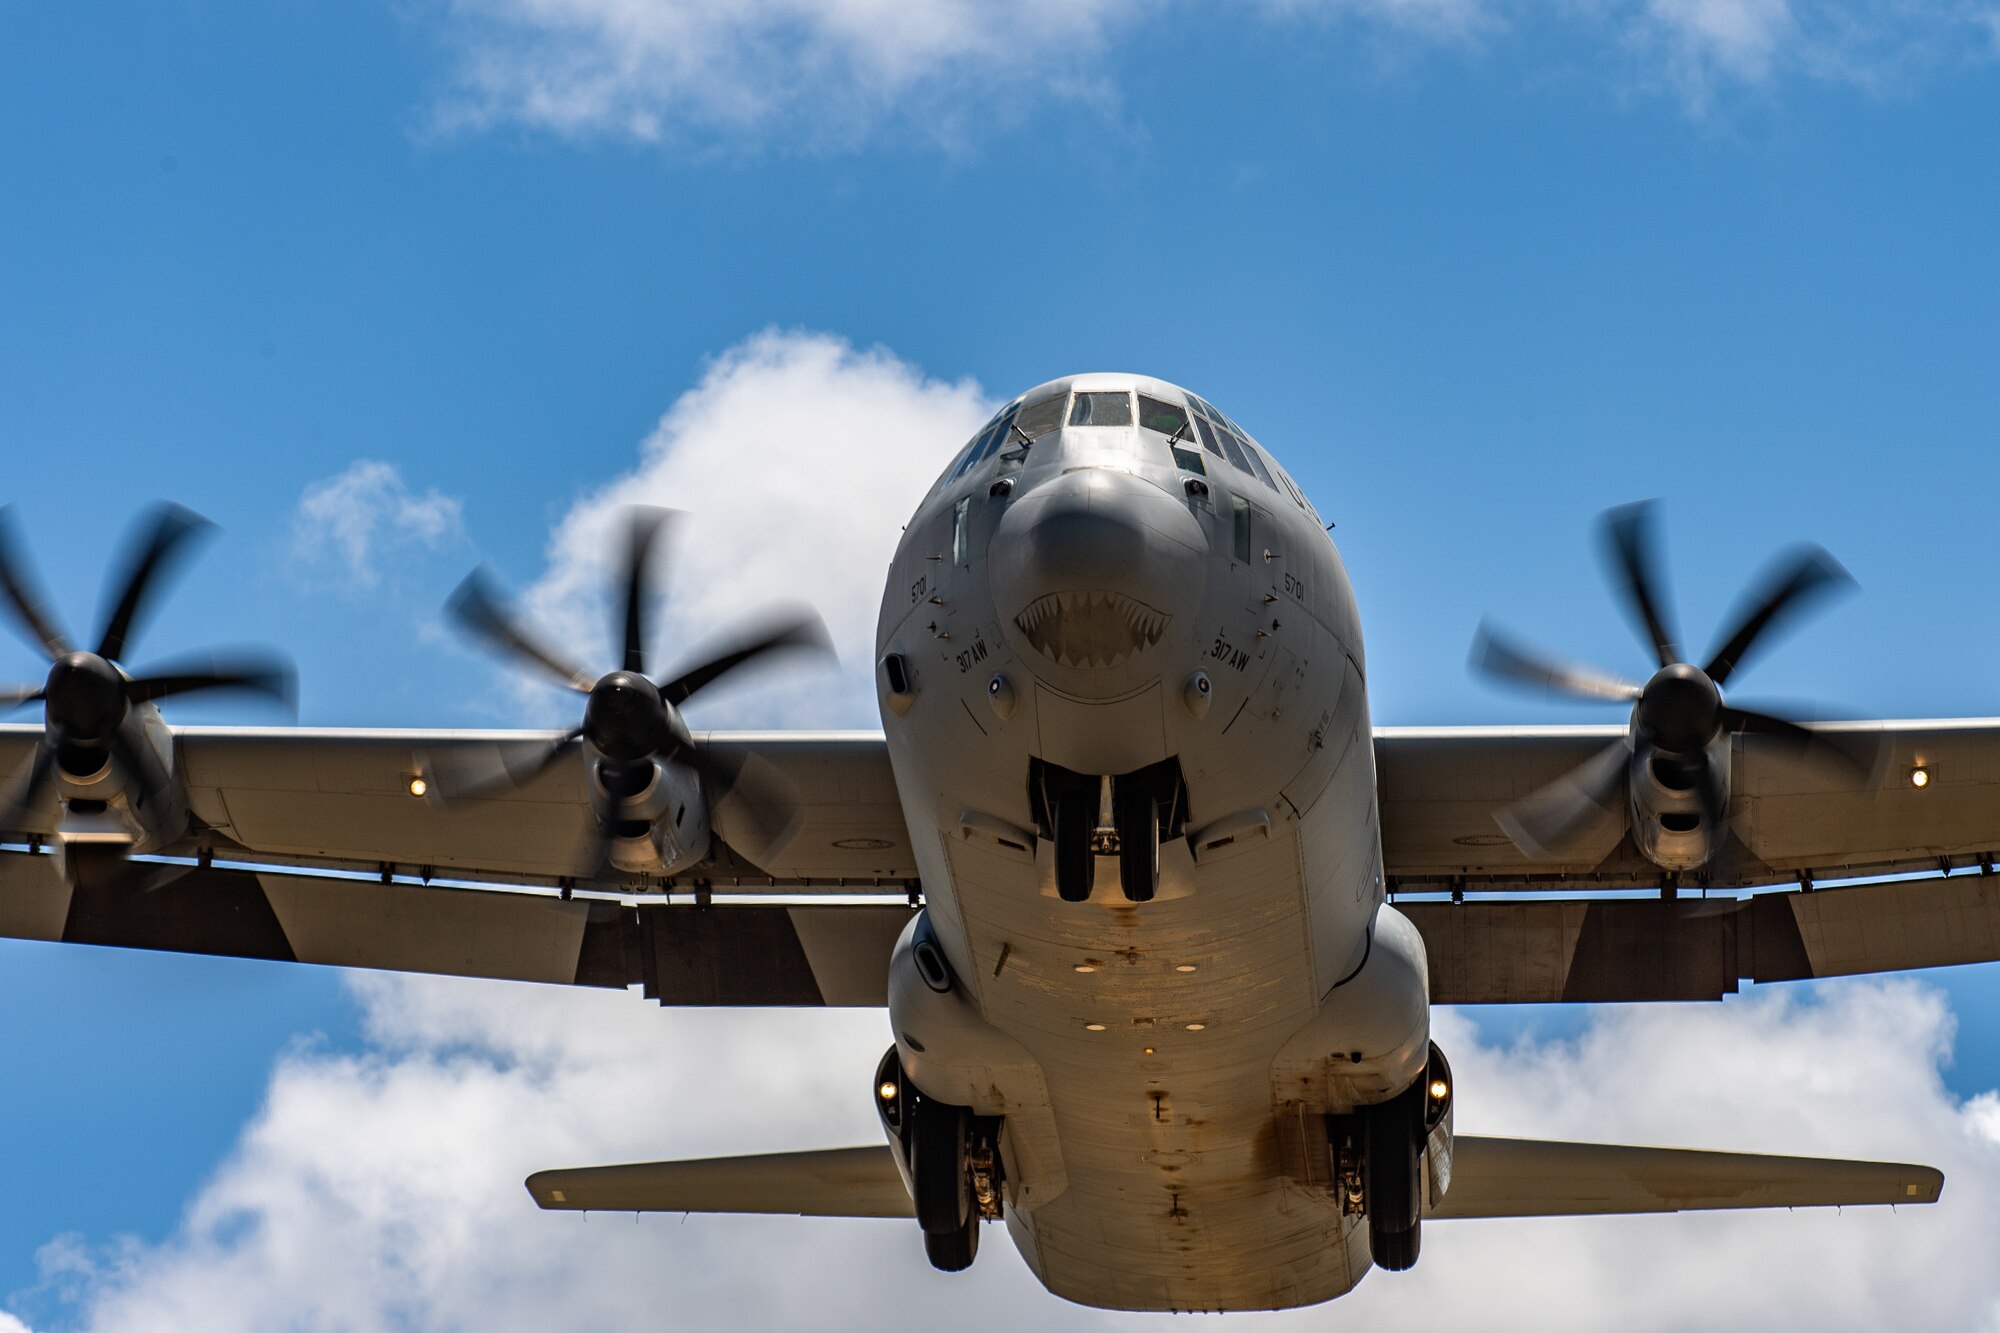 A U.S. Air Force C-130J Super Hercules approaches for landing at Camp Simba, Kenya, Aug. 26, 2019. The aircrew, assigned to the 75th Expeditionary Airlift Squadron, transport cargo and personnel for the 475th Expeditionary Air Base Squadron at Camp Simba. (U.S. Air Force photo by Staff Sgt. Devin Boyer)